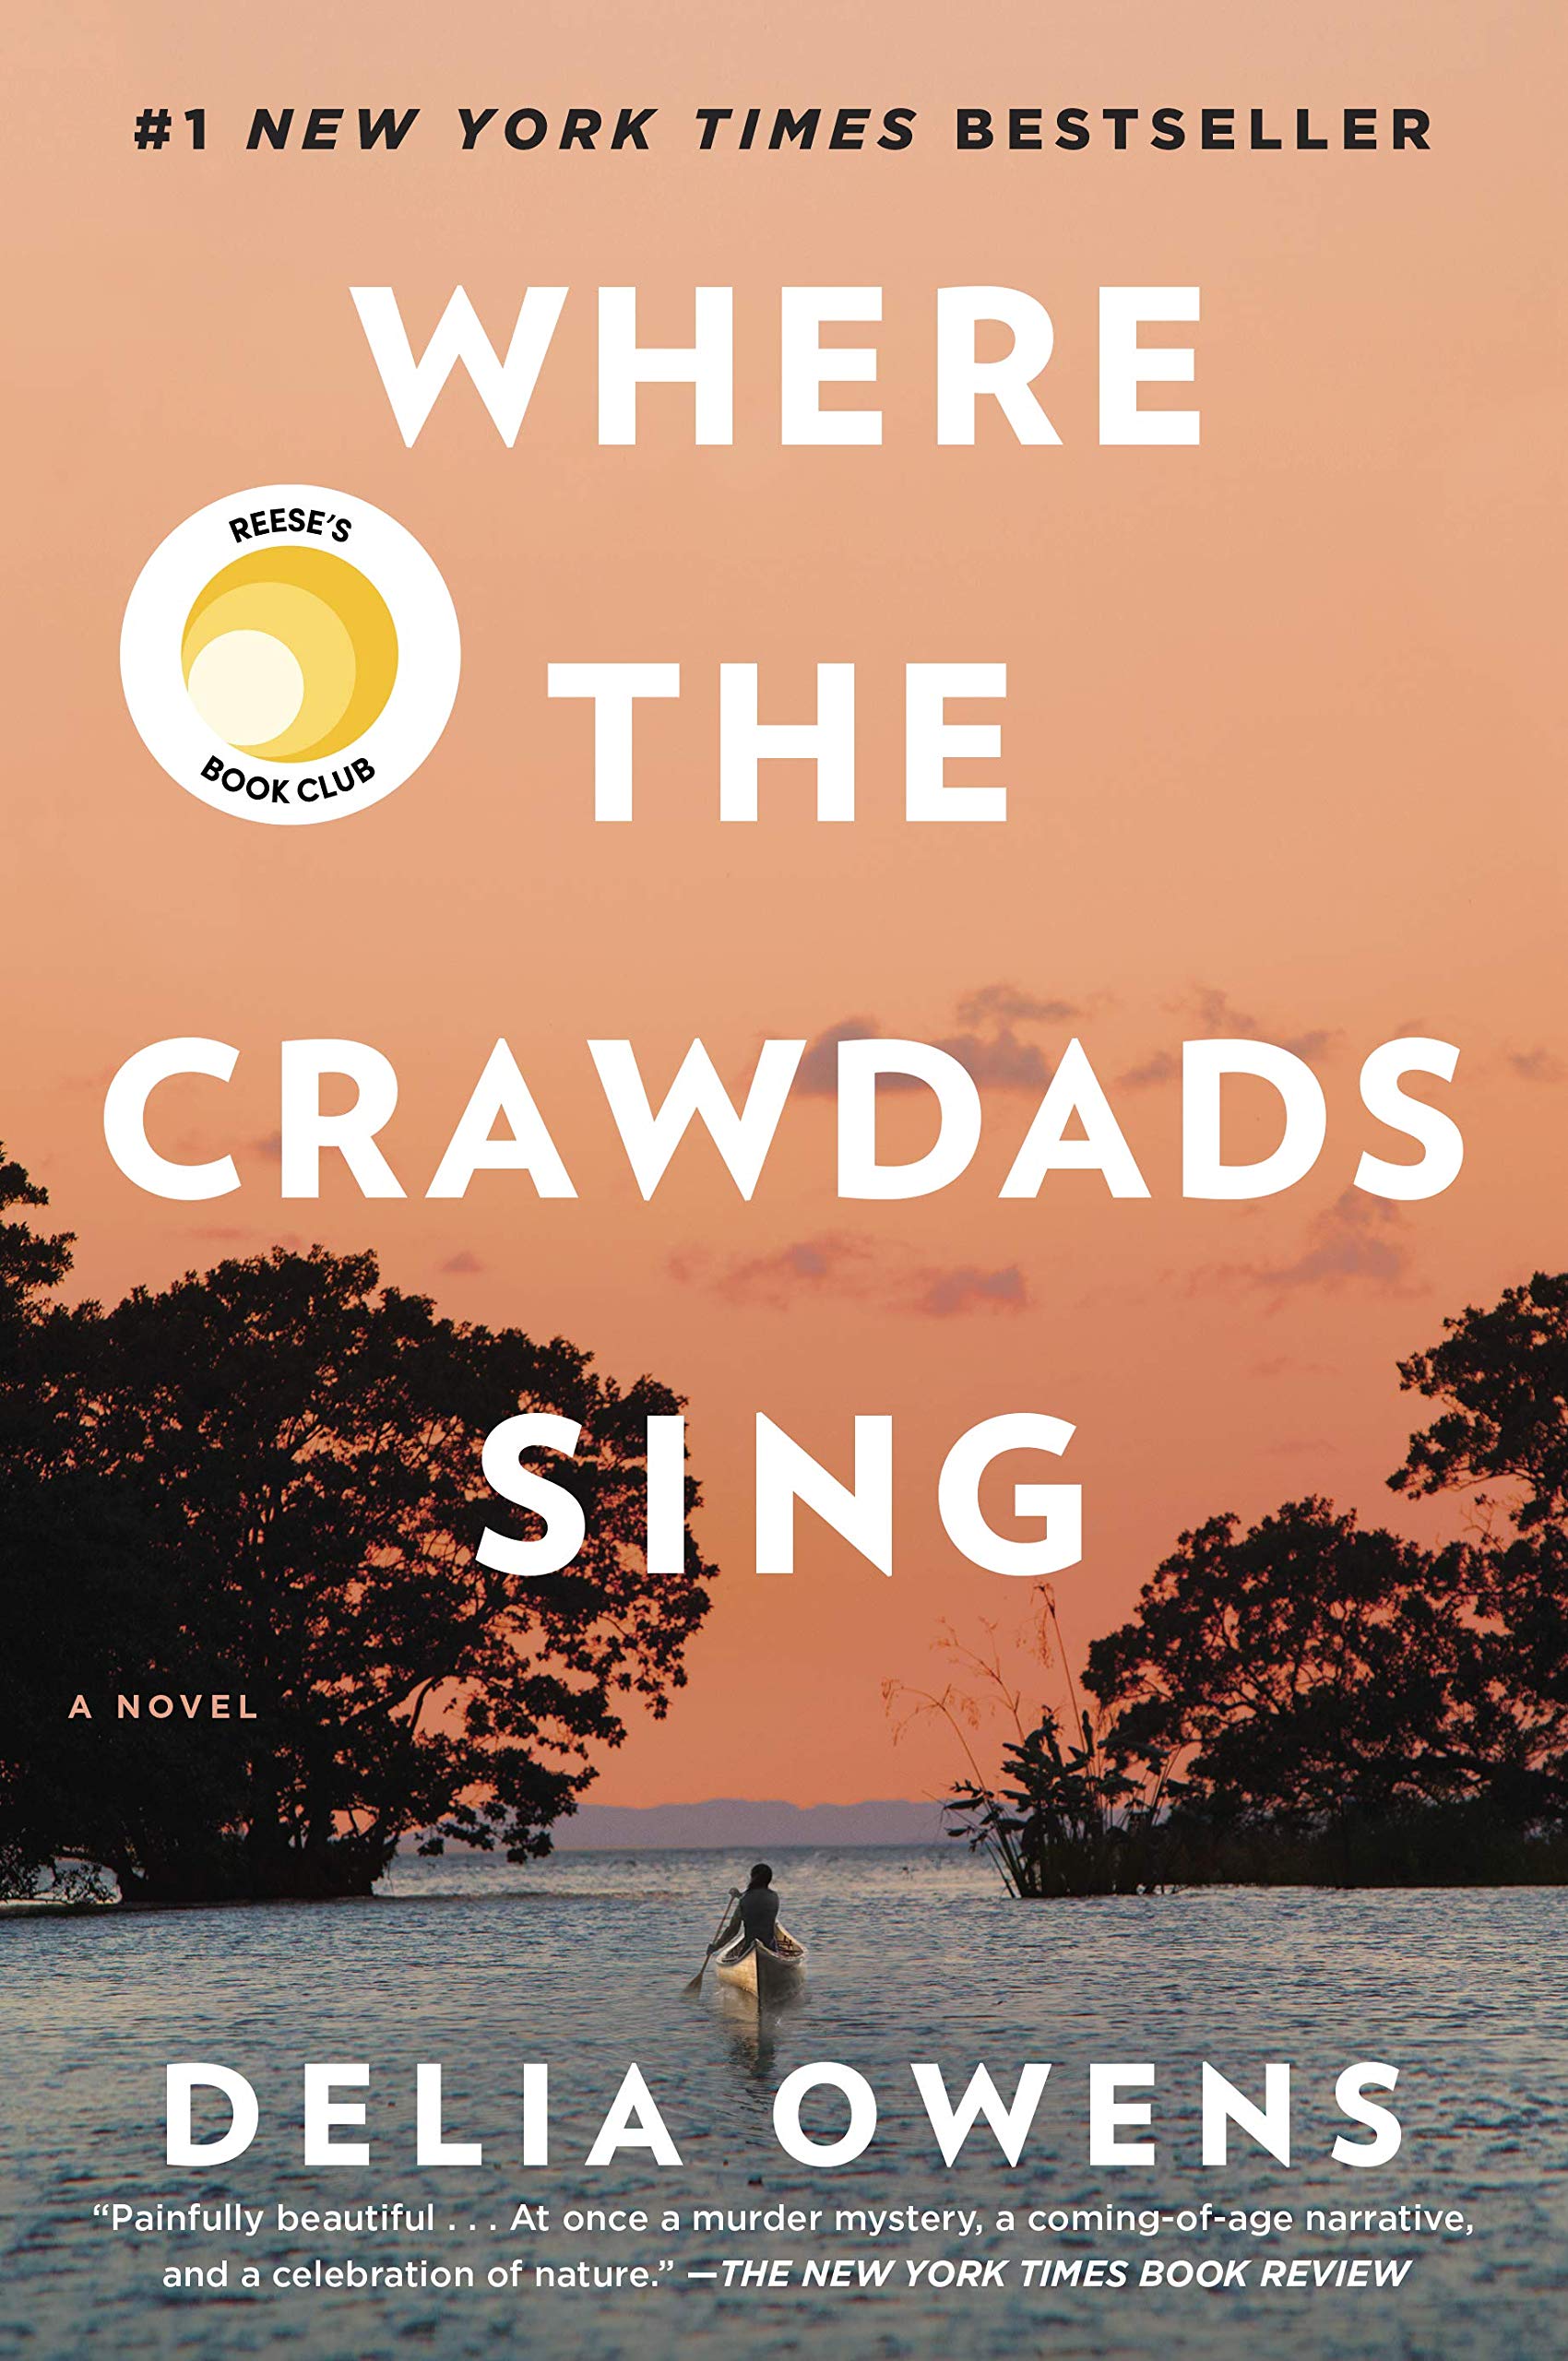 Image of the book cover for Where the Crawdads Sing by Delia Owens